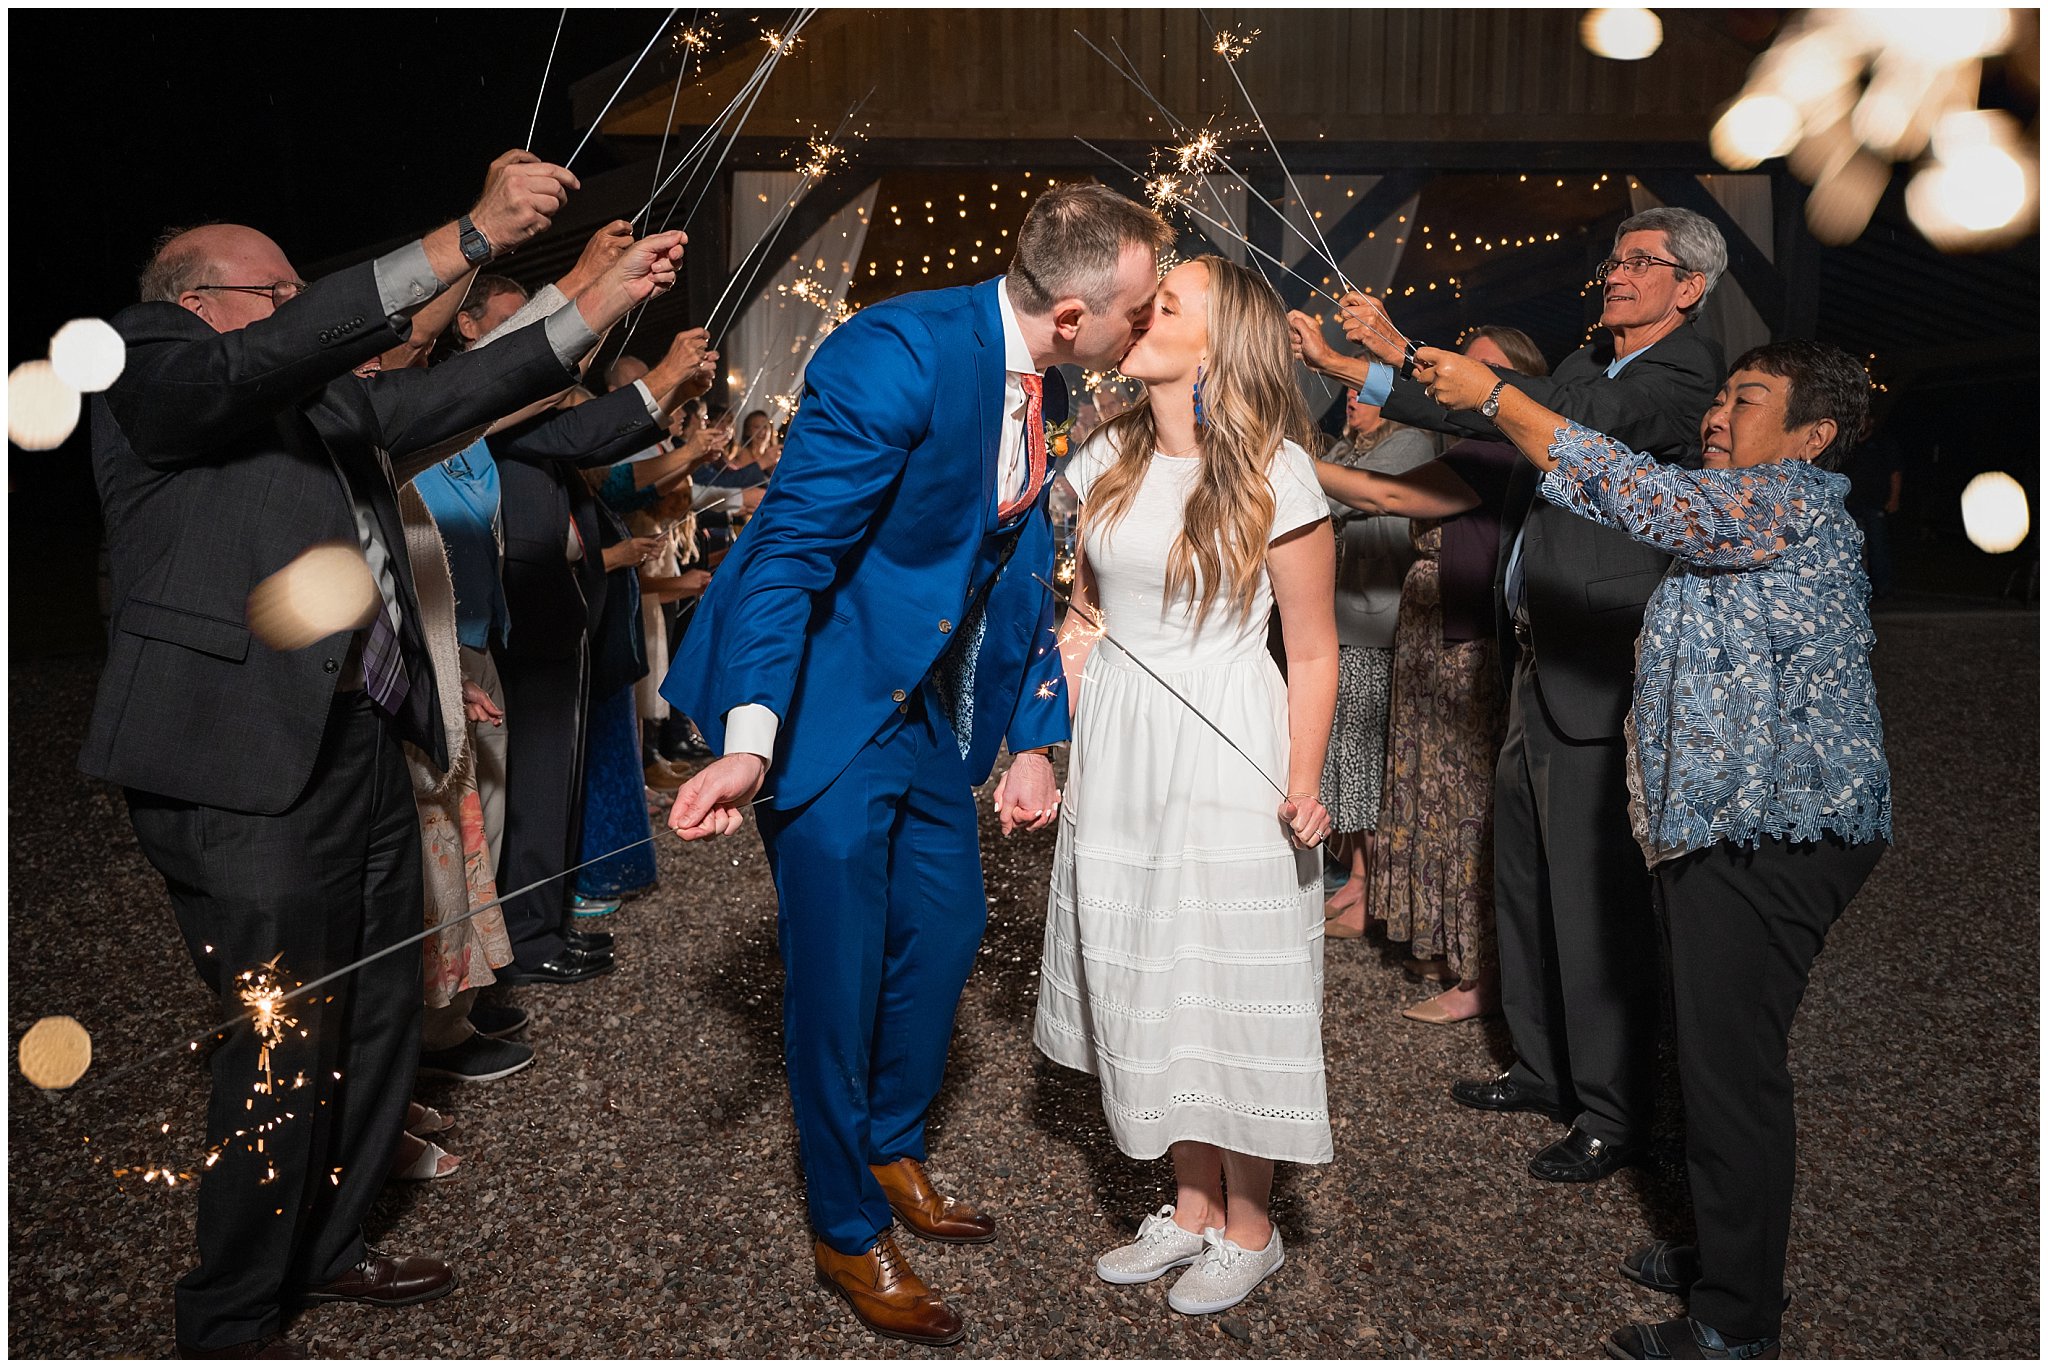 Sparkler exit during wedding in the Montana forest | Mountainside Weddings Kalispell Montana Destination Wedding | Jessie and Dallin Photography